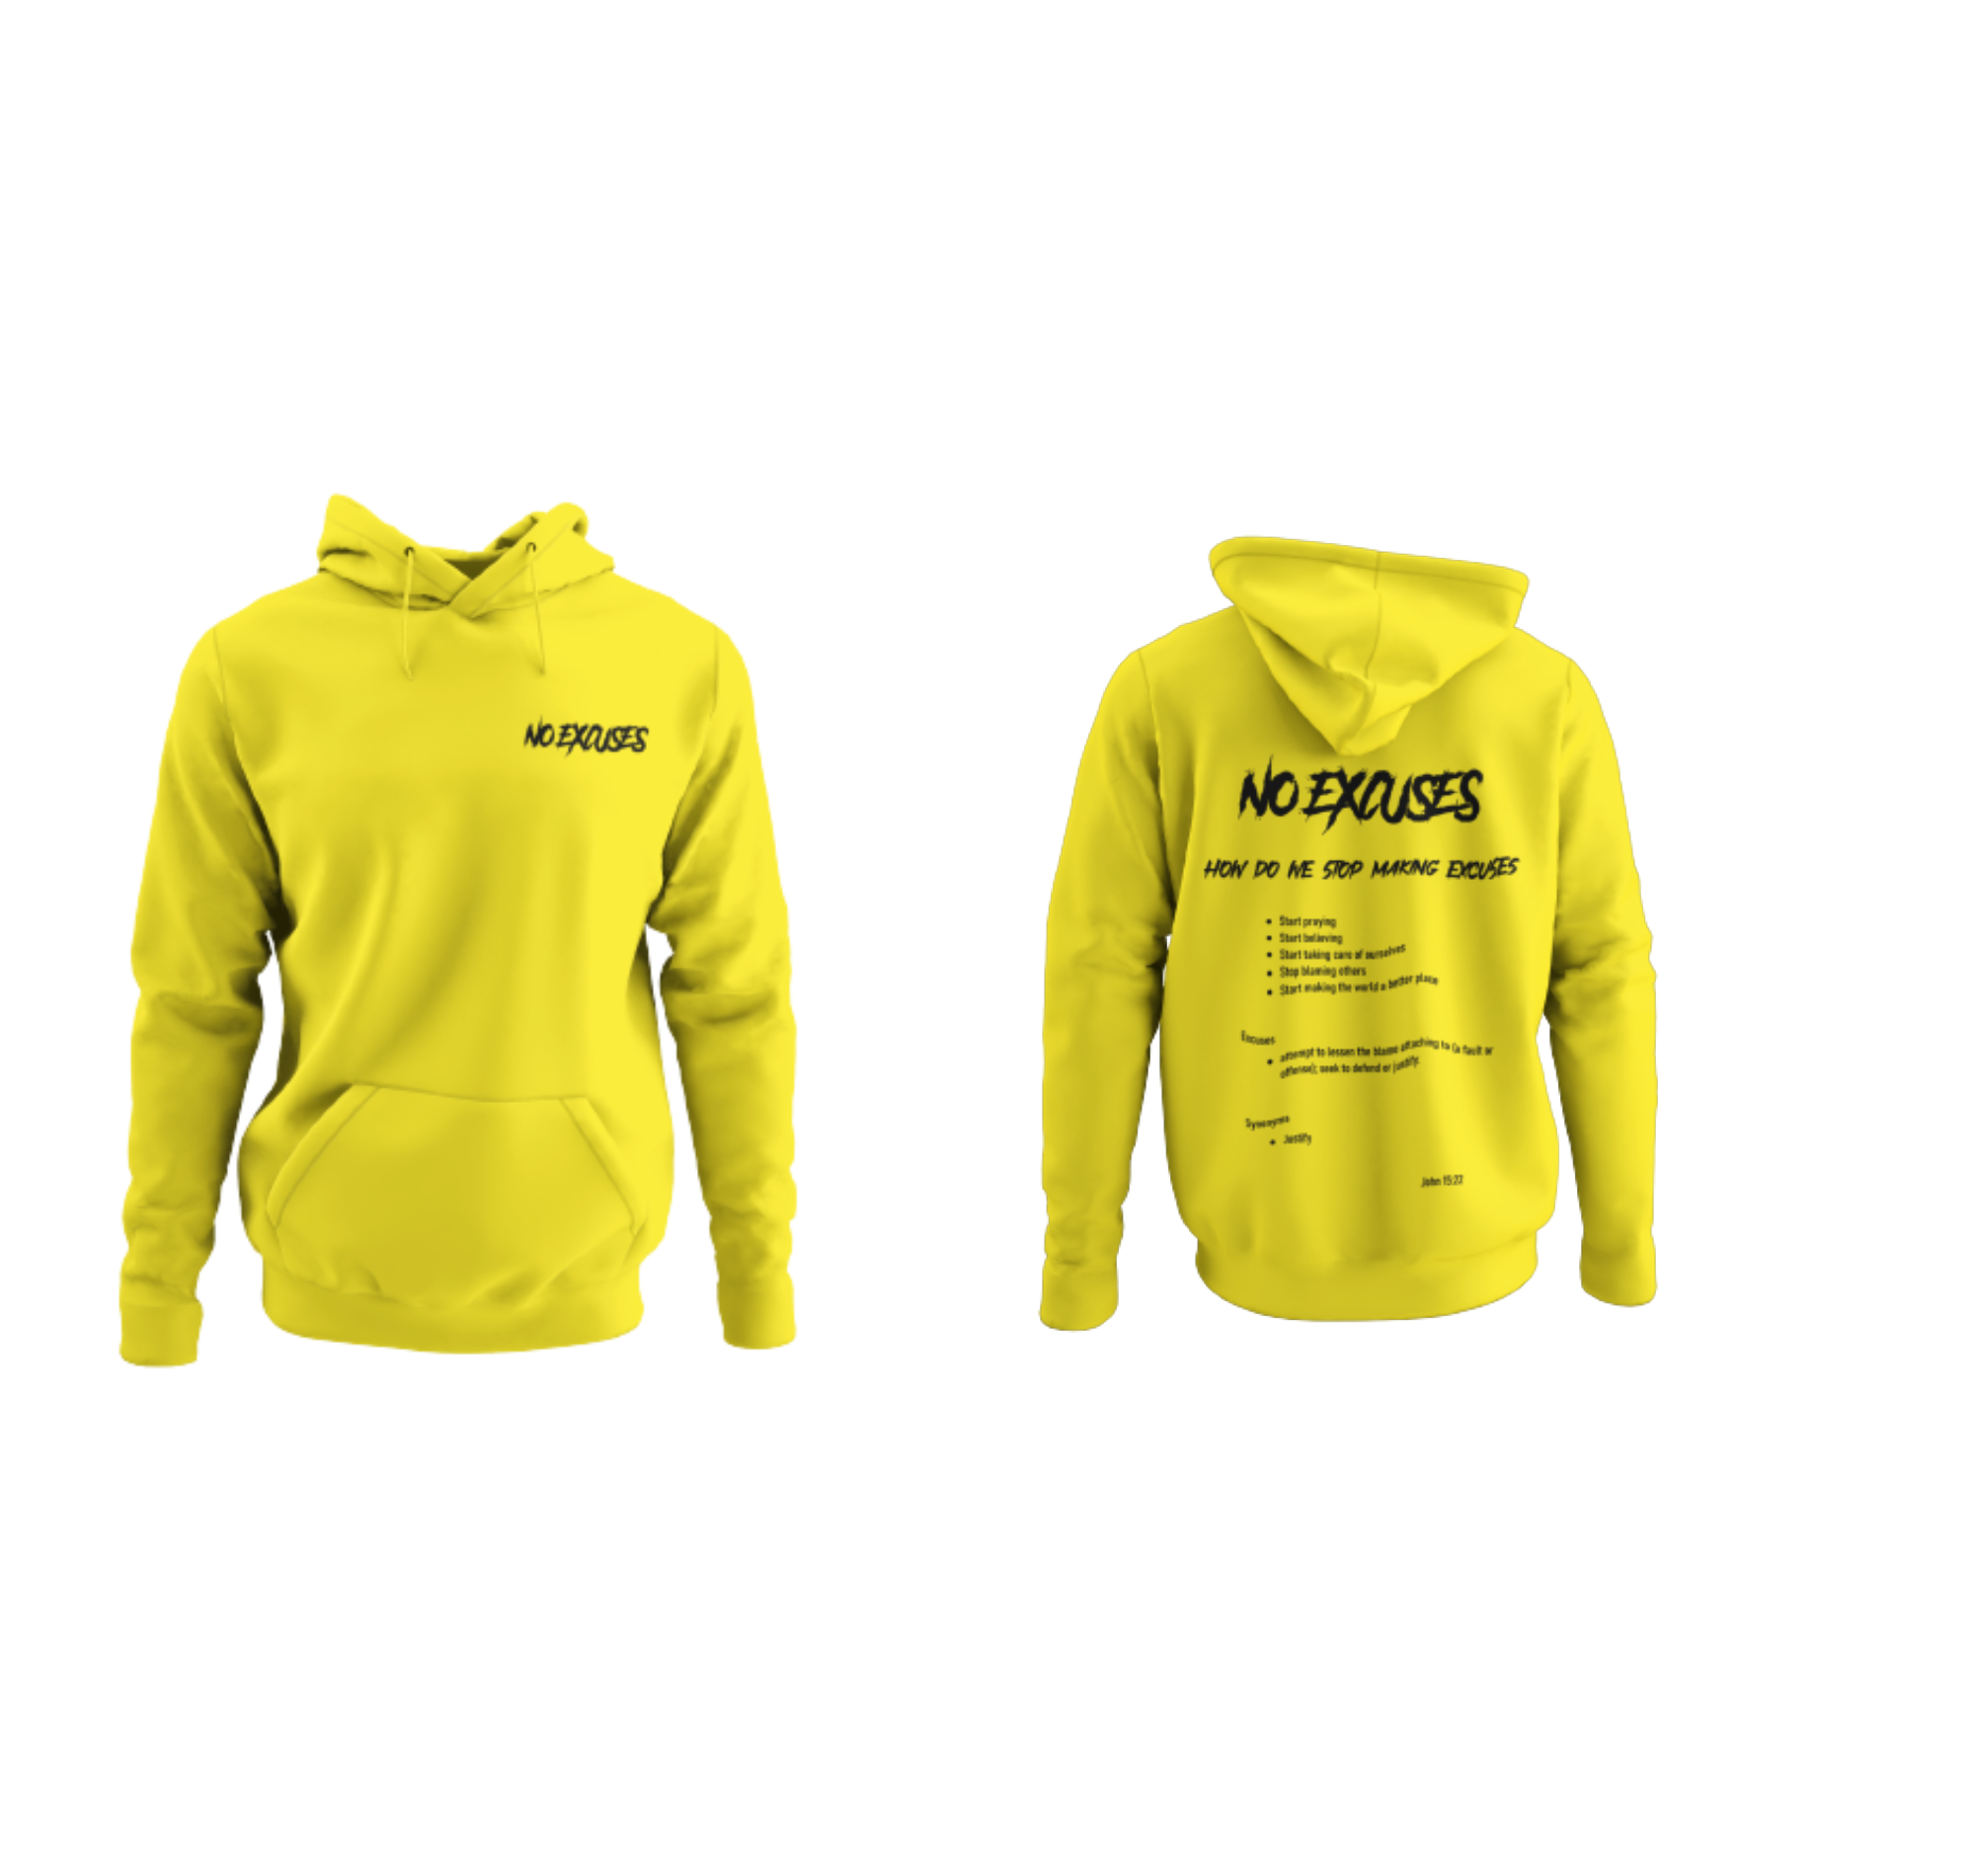 No Excuses Adult Hoodies Yellow (SMALL LOGO)